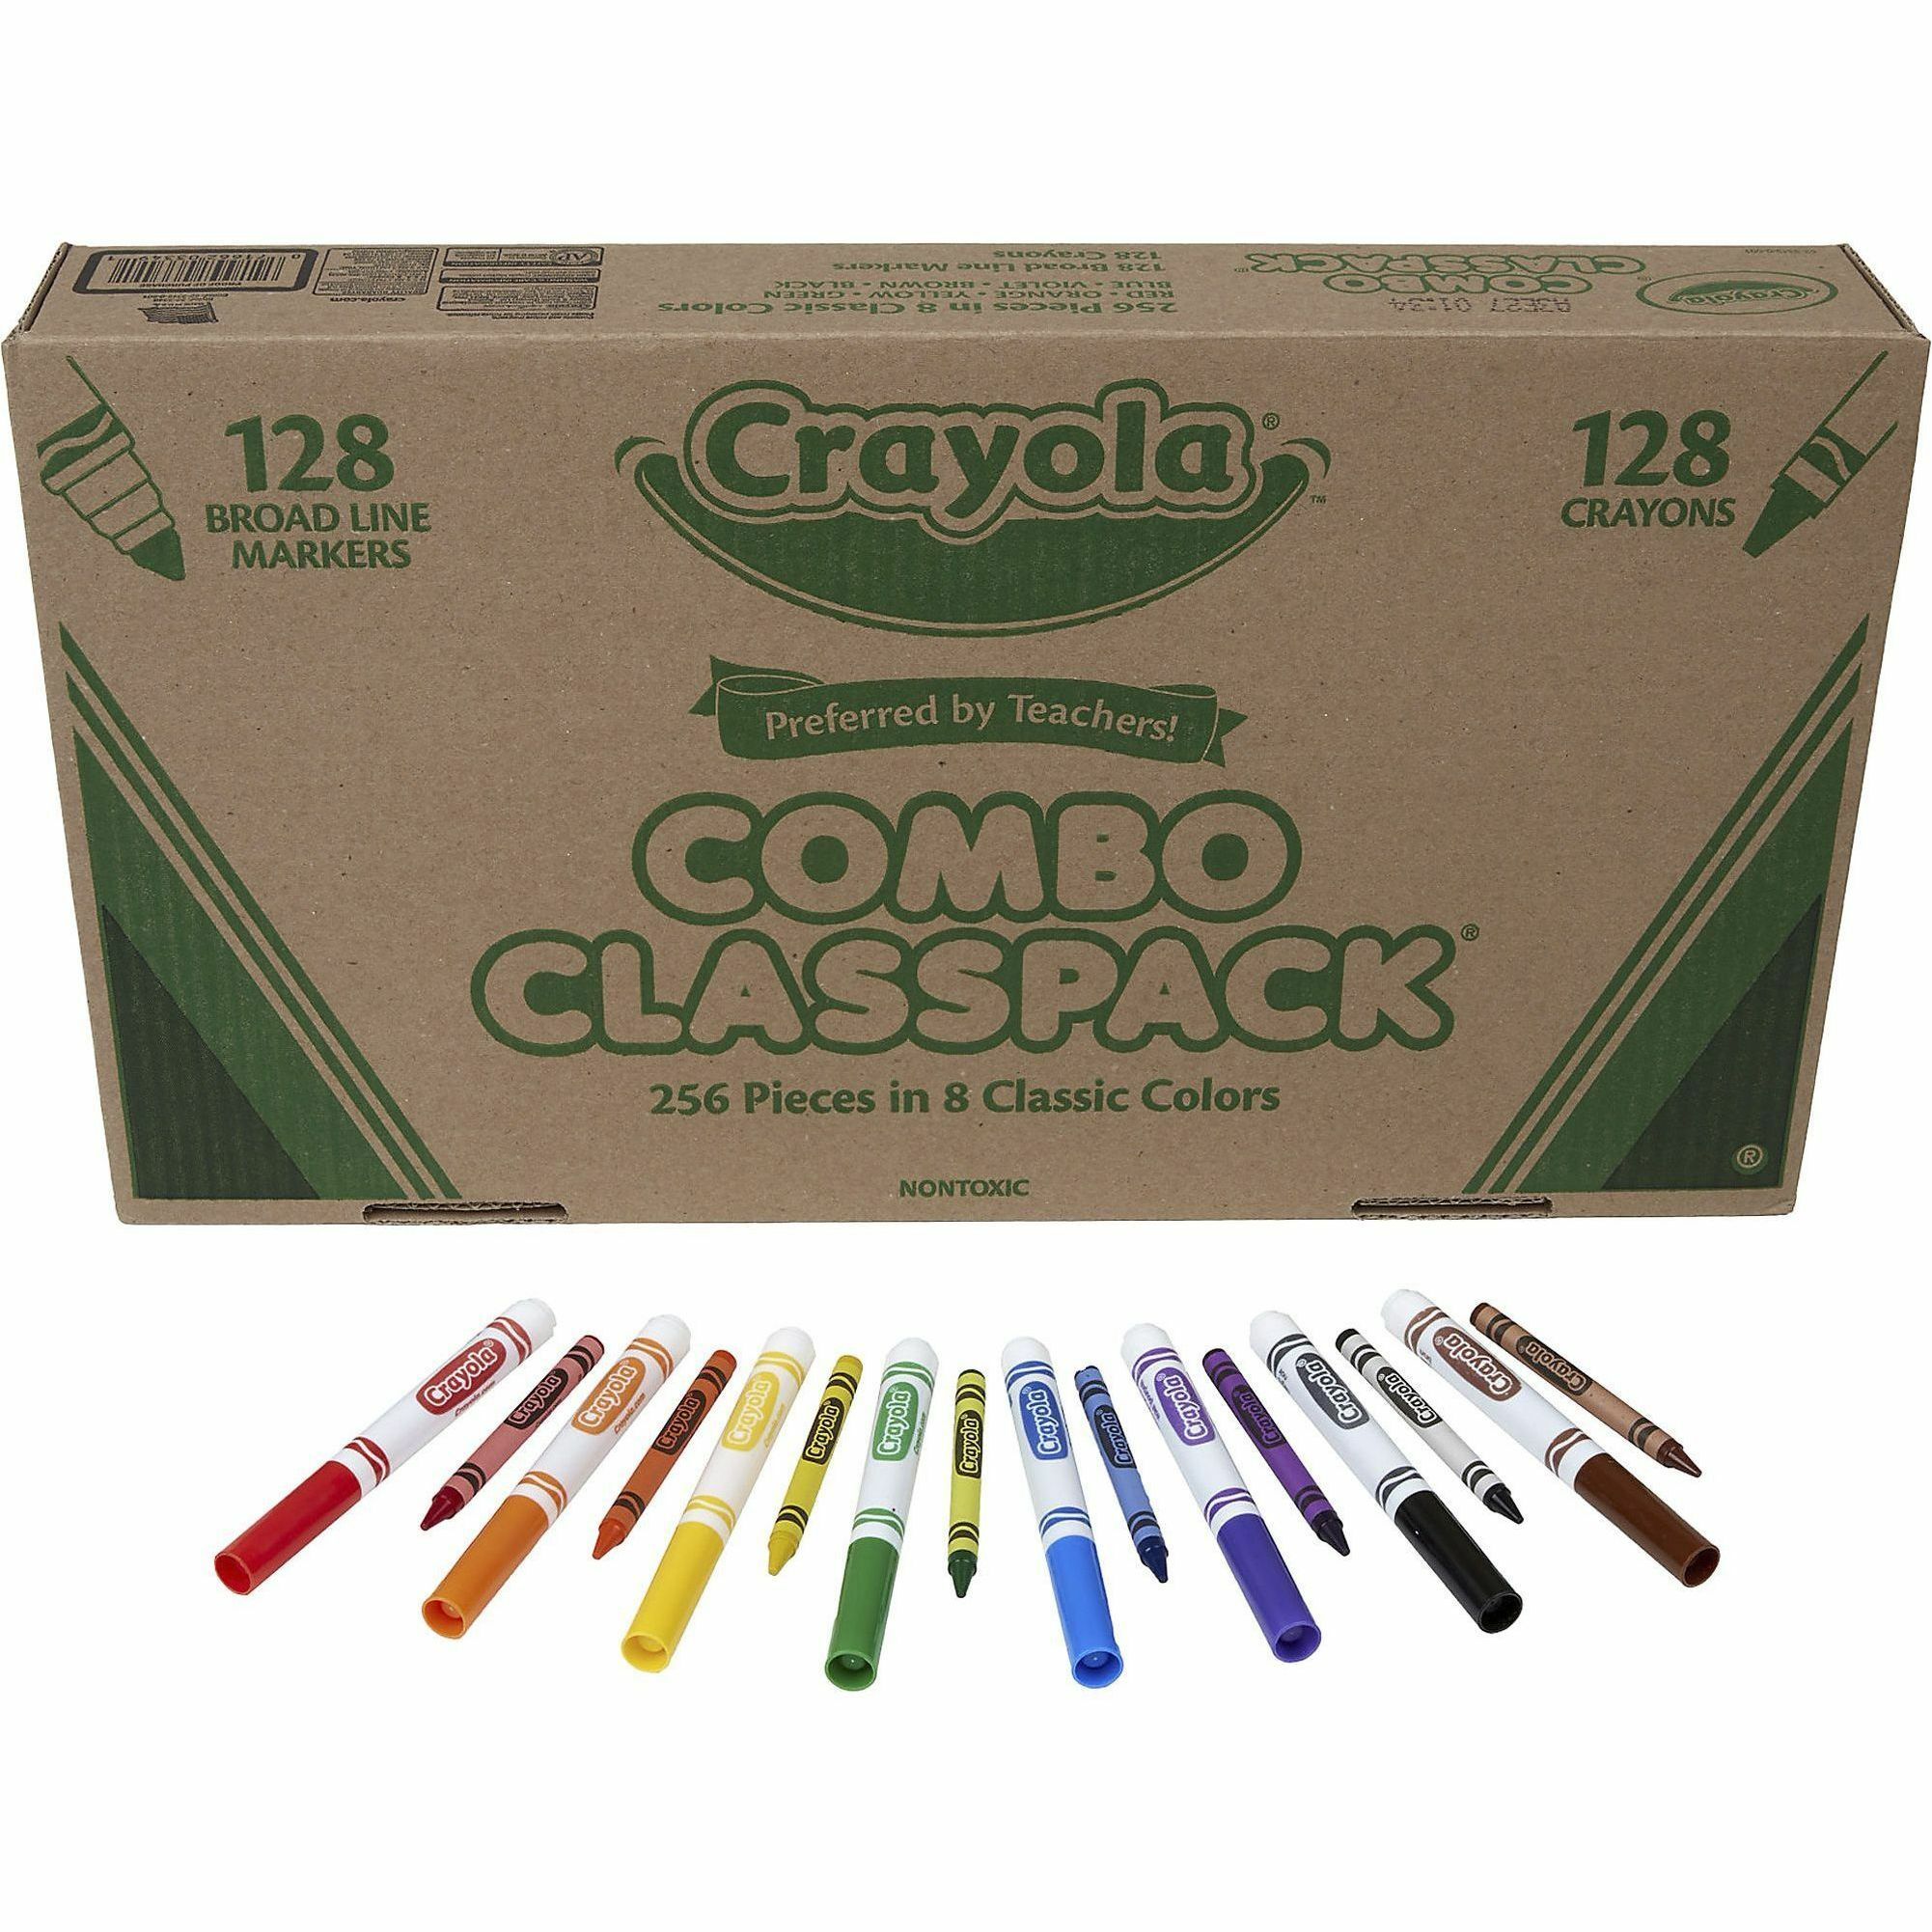 8 Count Crayola Jumbo Crayons: What's Inside the Box